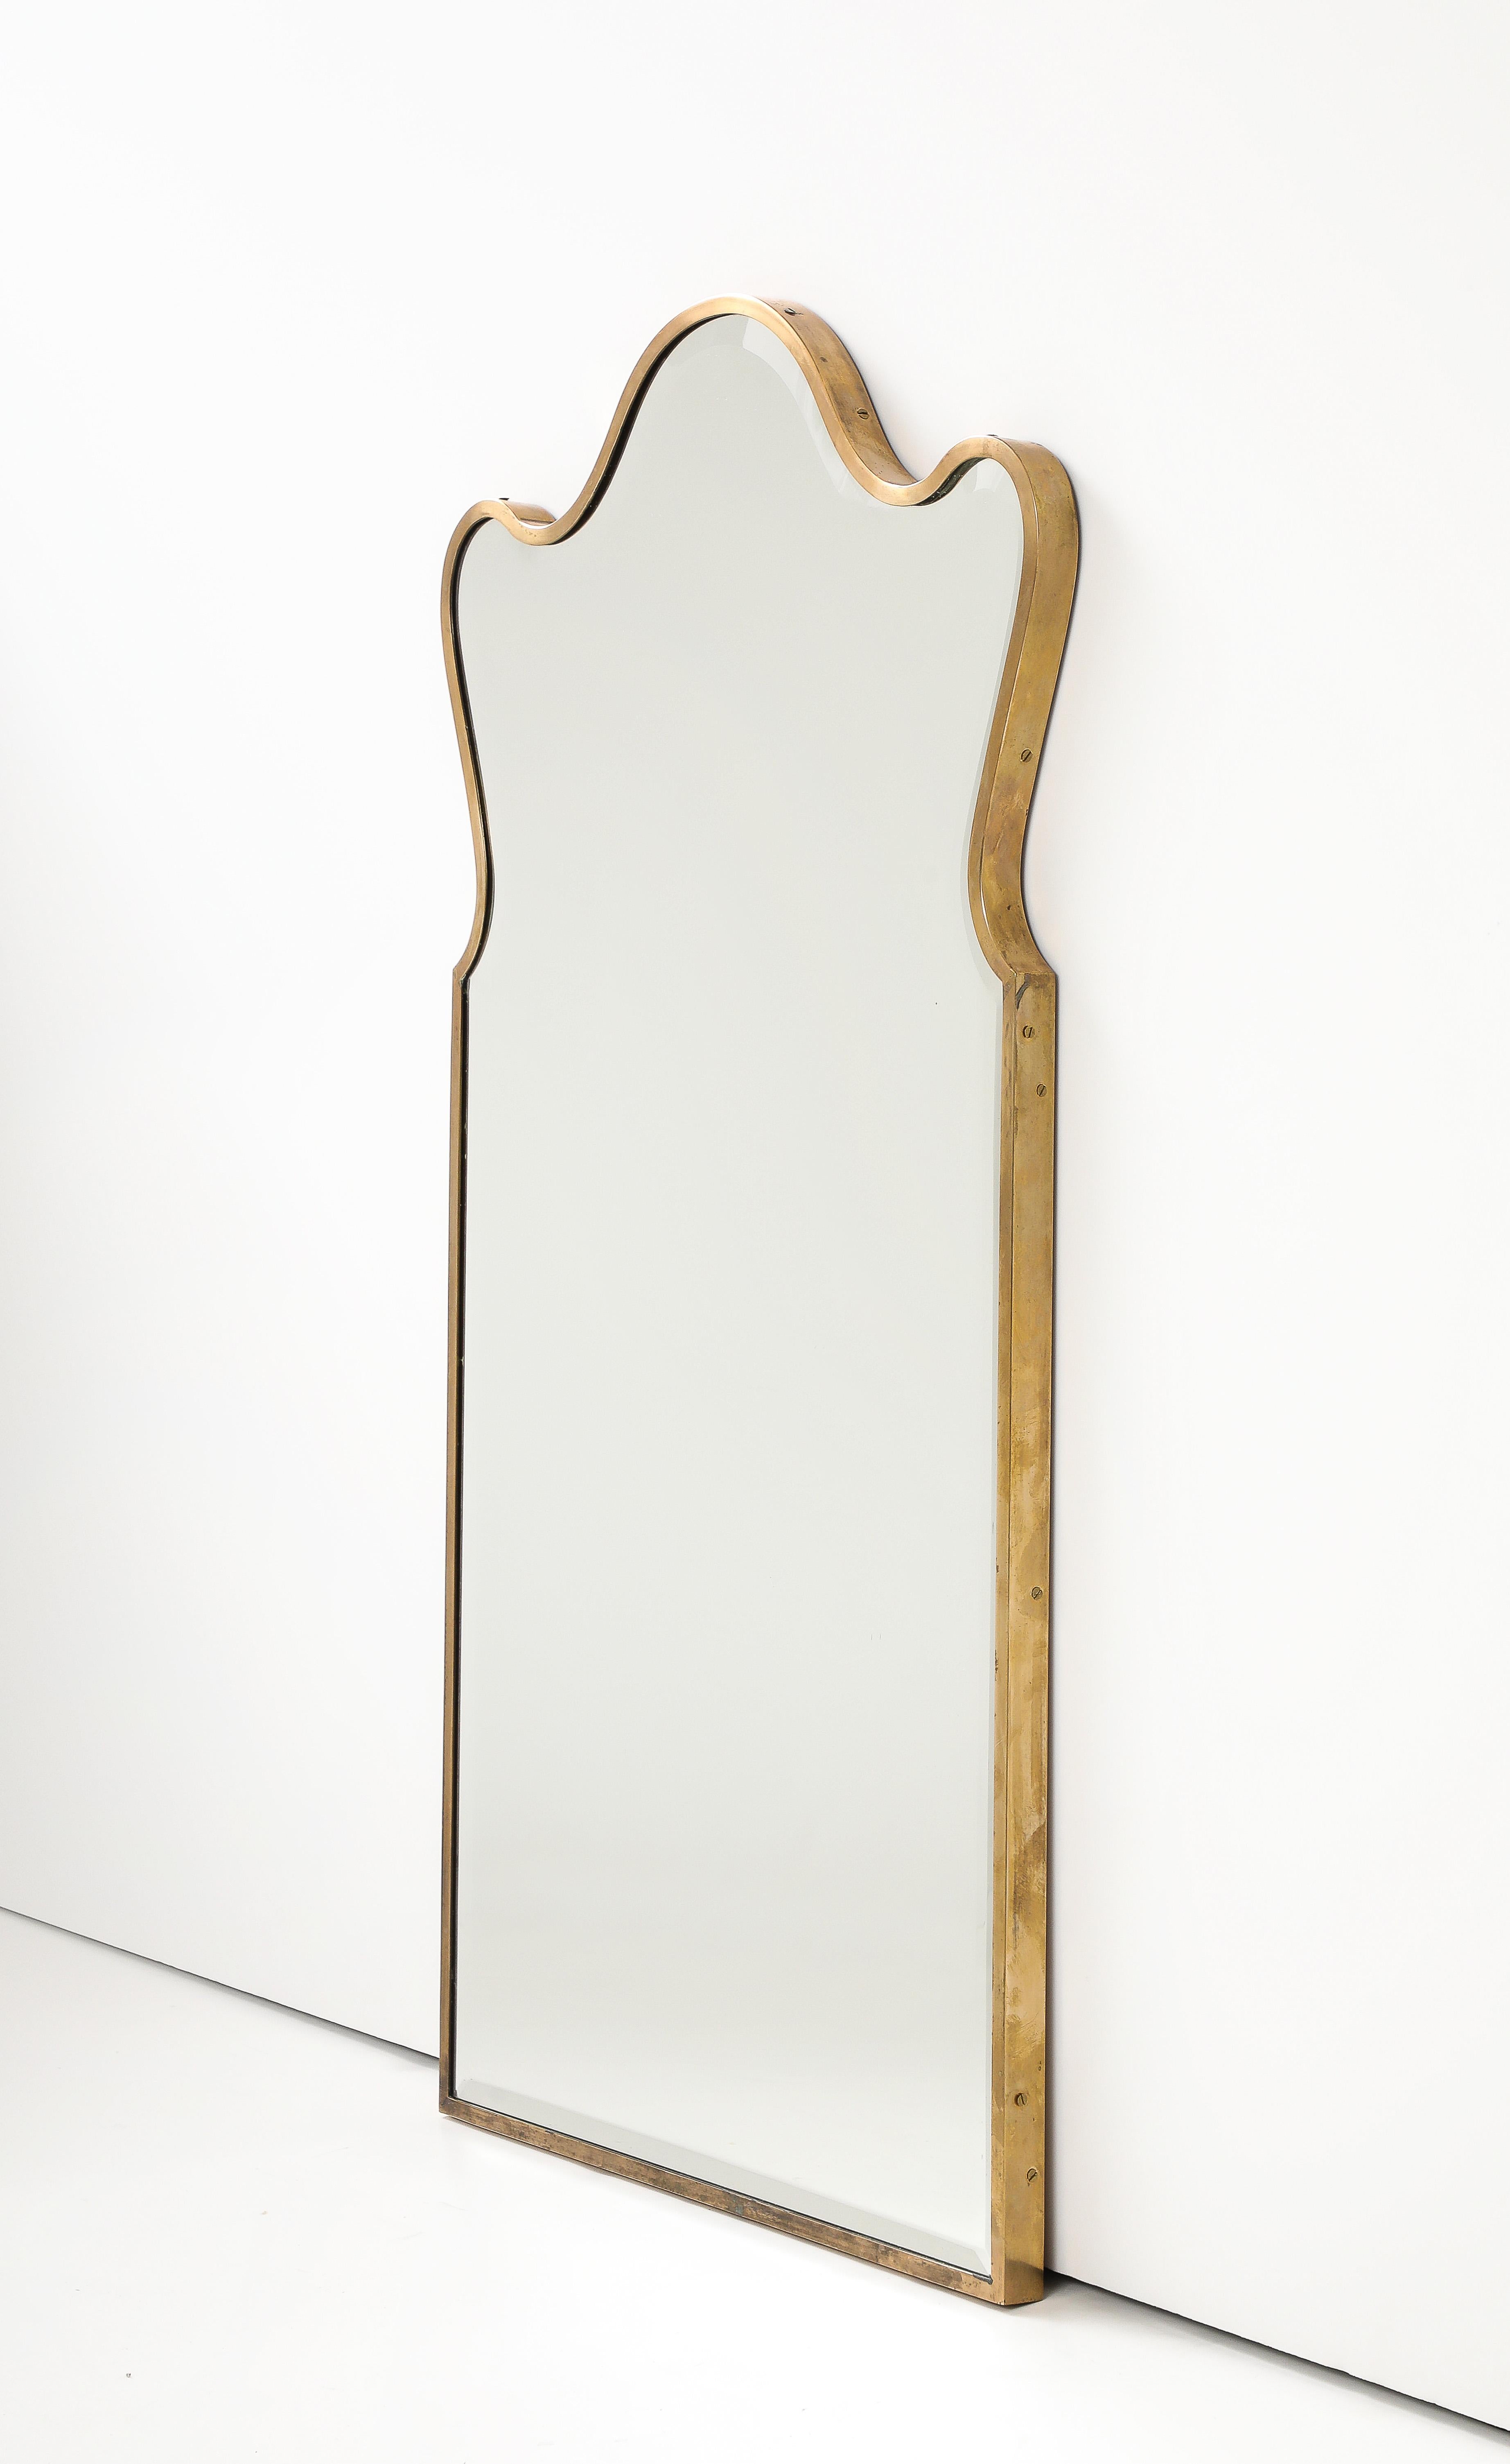 talian Mid Century Modern Mirror with thick Bass Brass and Bevelled Edge, 1950’s

H: 37.5 W: 20.5 D: 1 in.

Depth of frame and the bevel